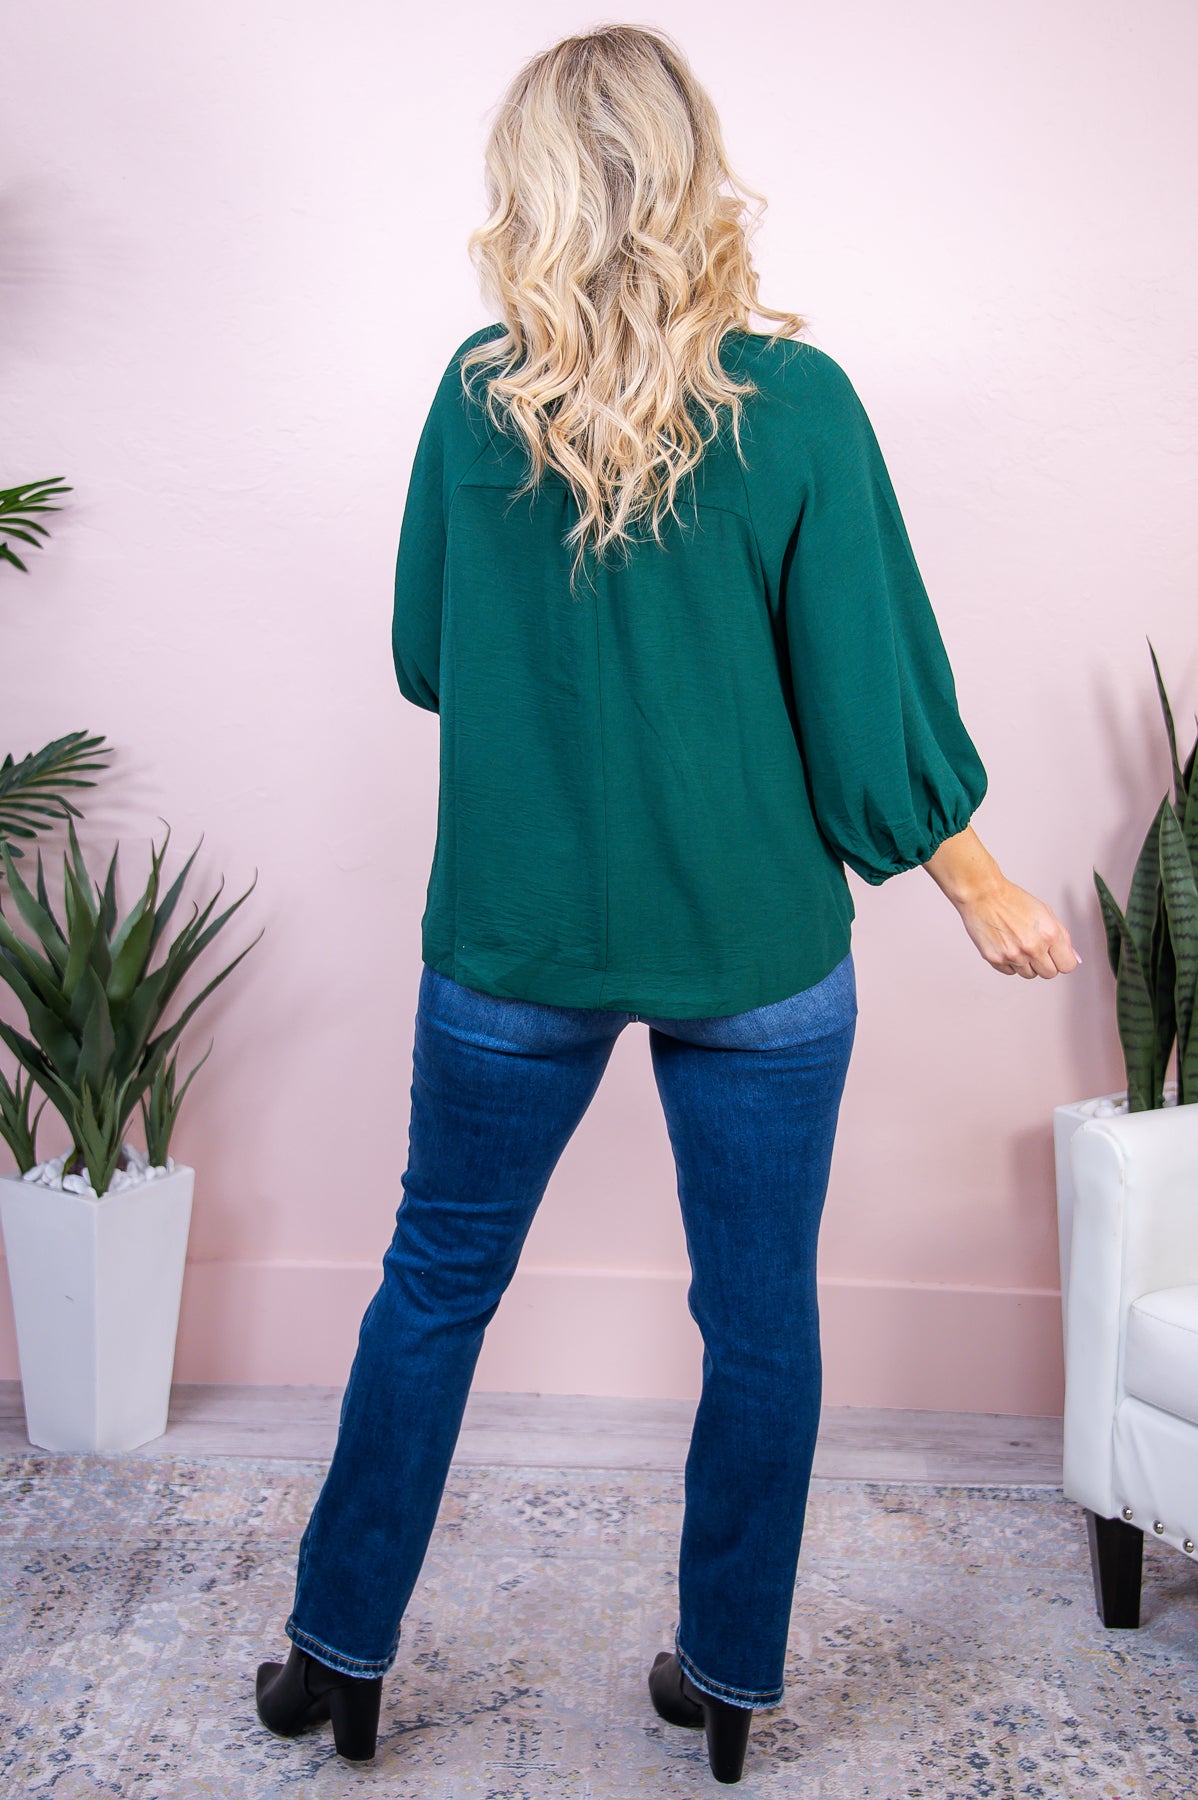 Forever In Fashion Forest Green Solid V Neck Top - T8135FGN